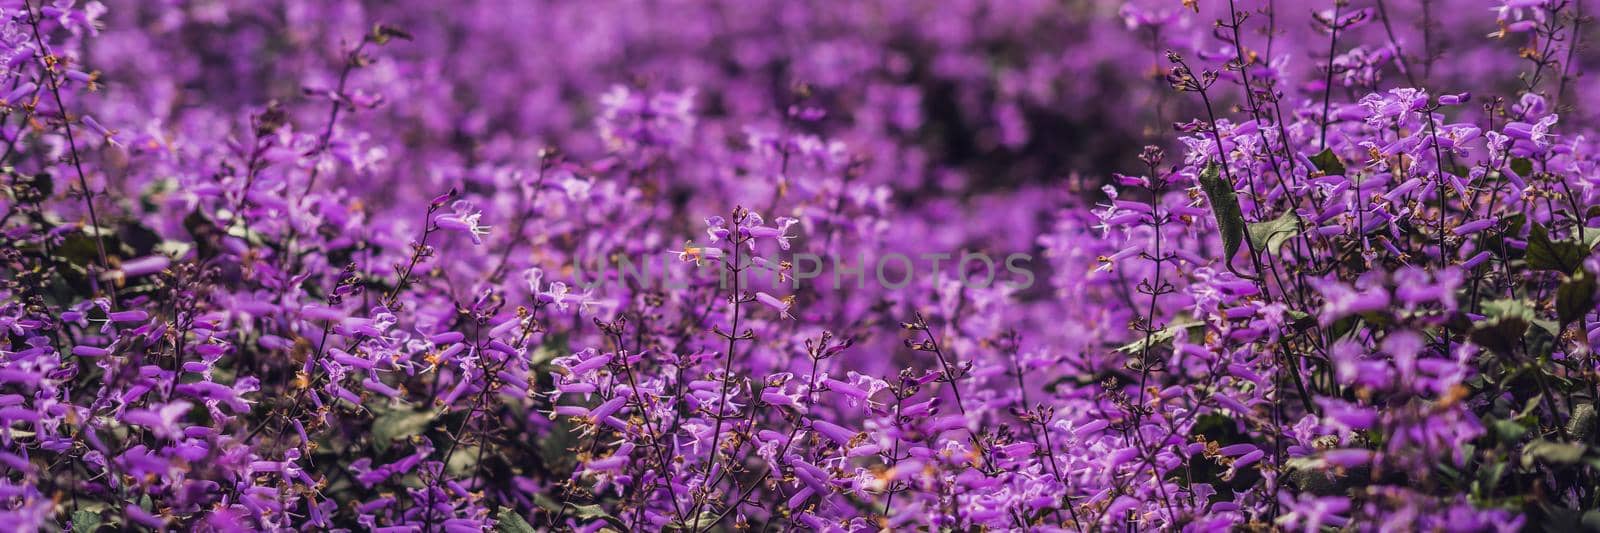 Lavender flowers at sunlight in a soft focus, pastel colors and blur background BANNER long format by galitskaya